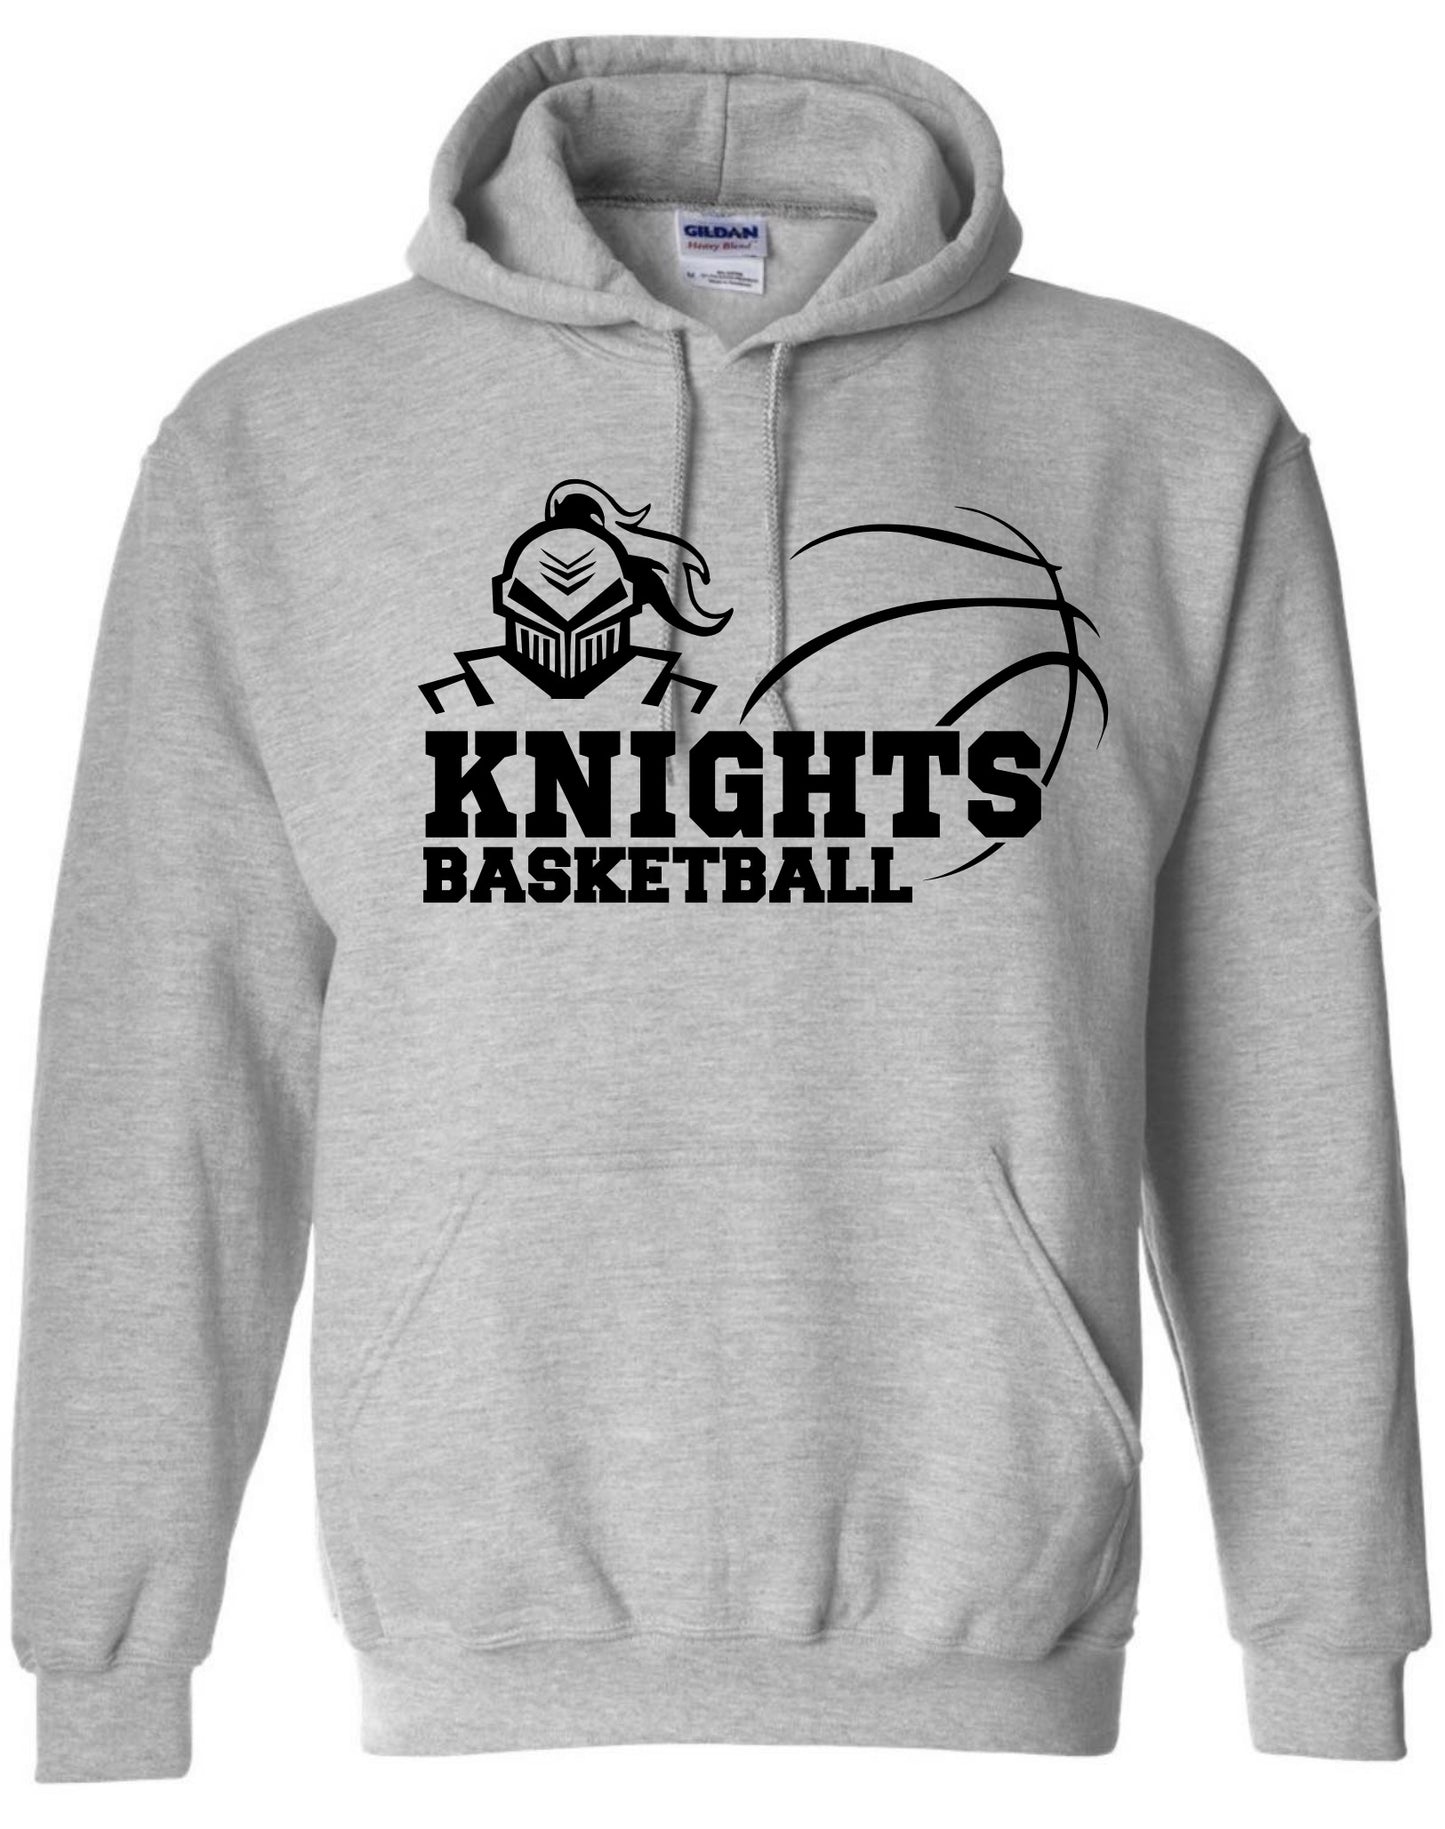 Knights Abstract Basketball Hoodie